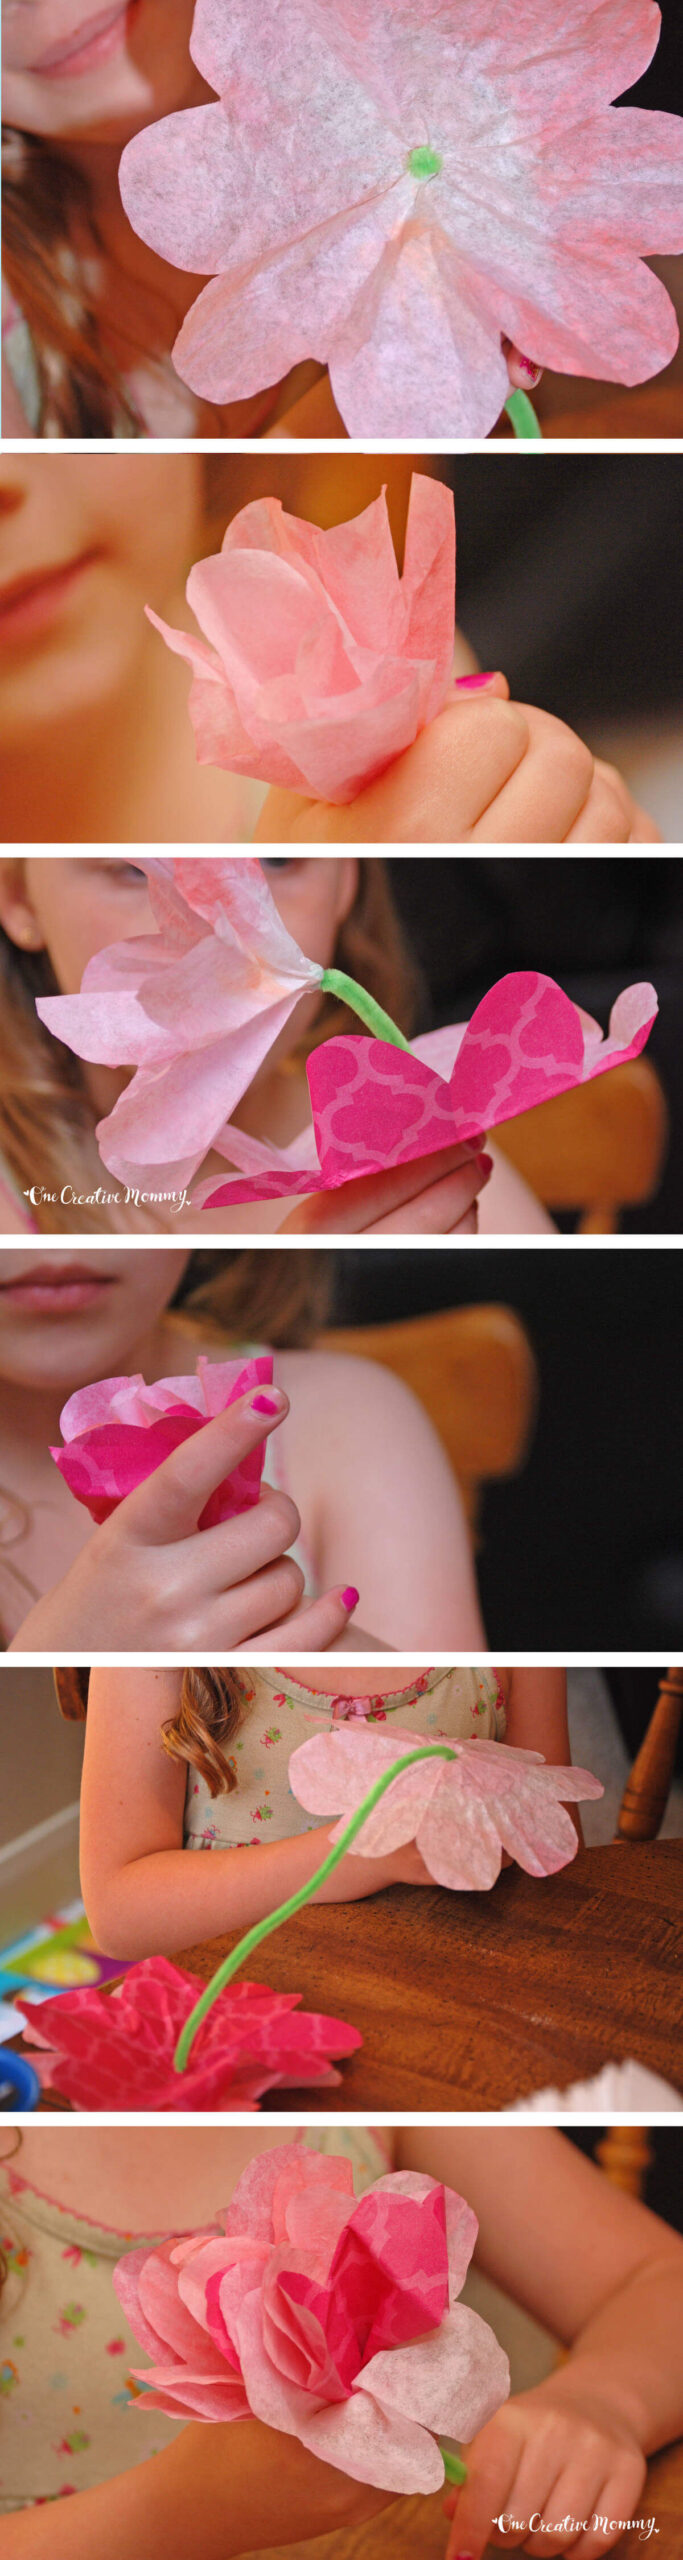 Step-by-step images of the process of creating coffee filter flowers